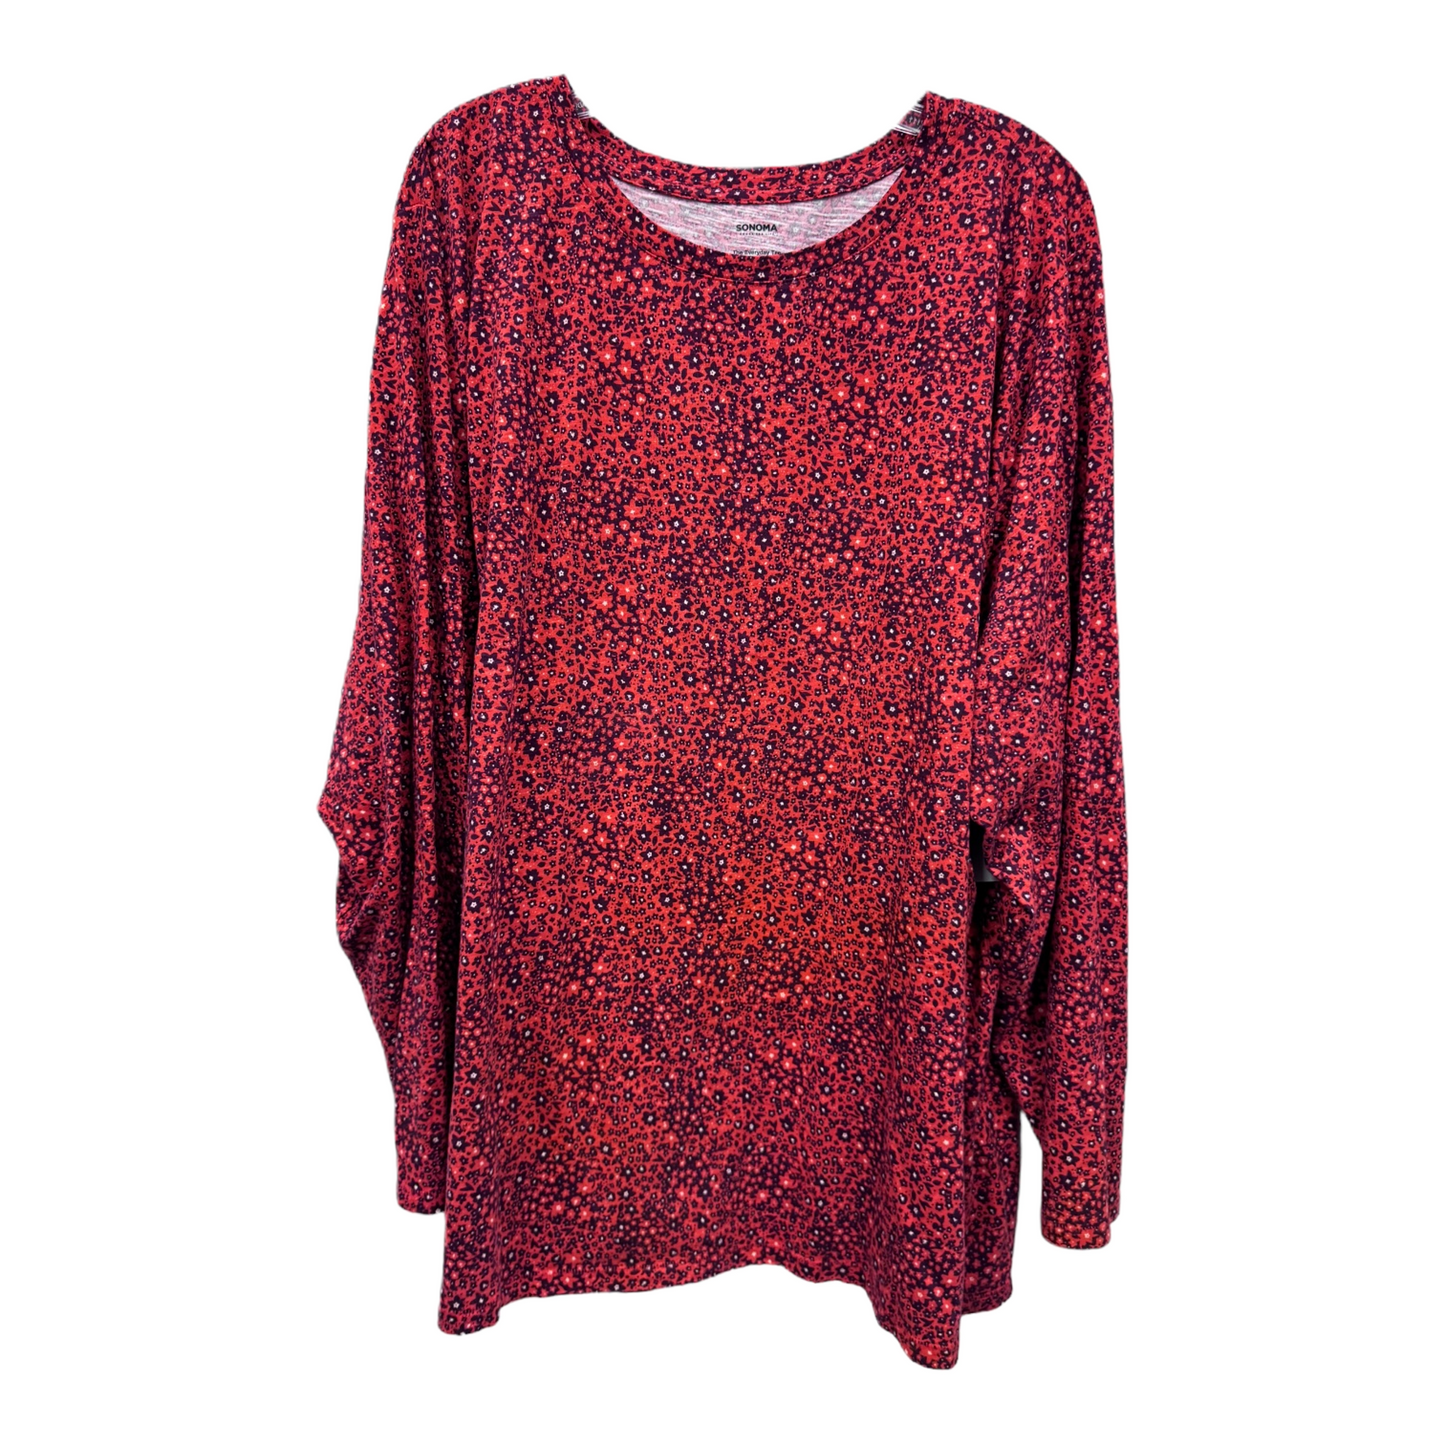 Red Top Long Sleeve By Sonoma, Size: 4x